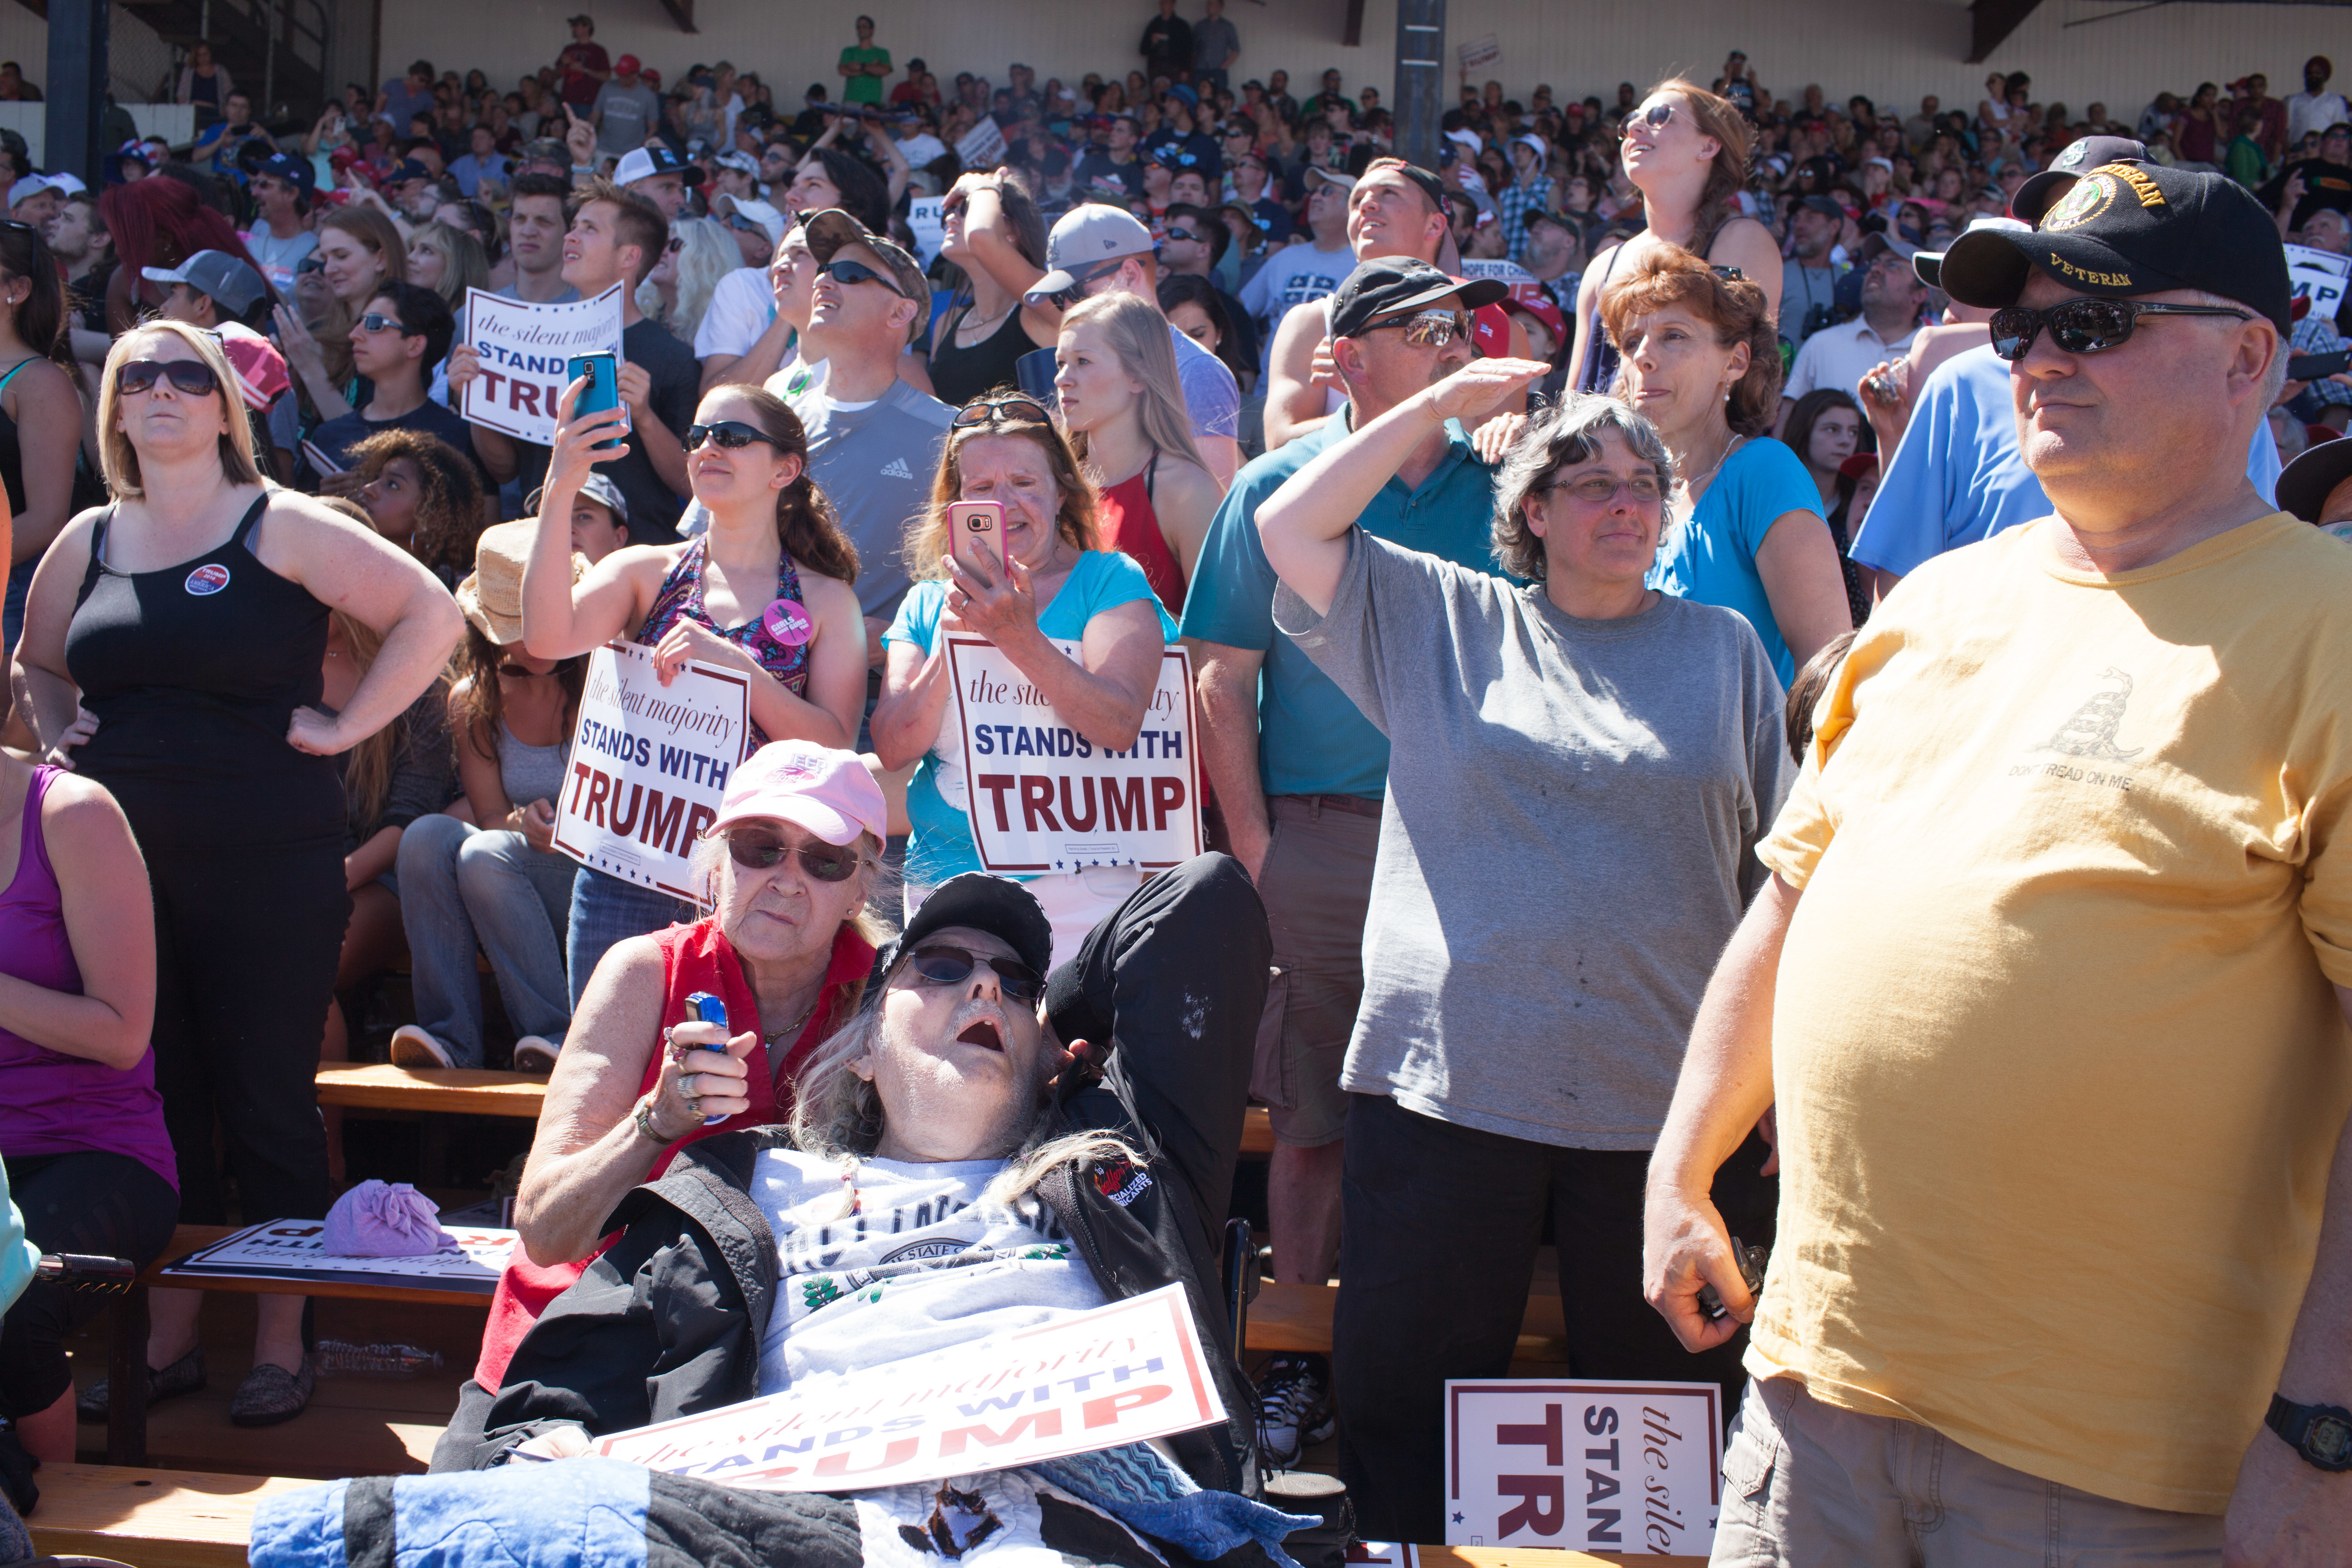 supporters-are-seen-during-a-republican-presidential-candidate-donald-trump-rally-at-the-the-northwe.jpeg